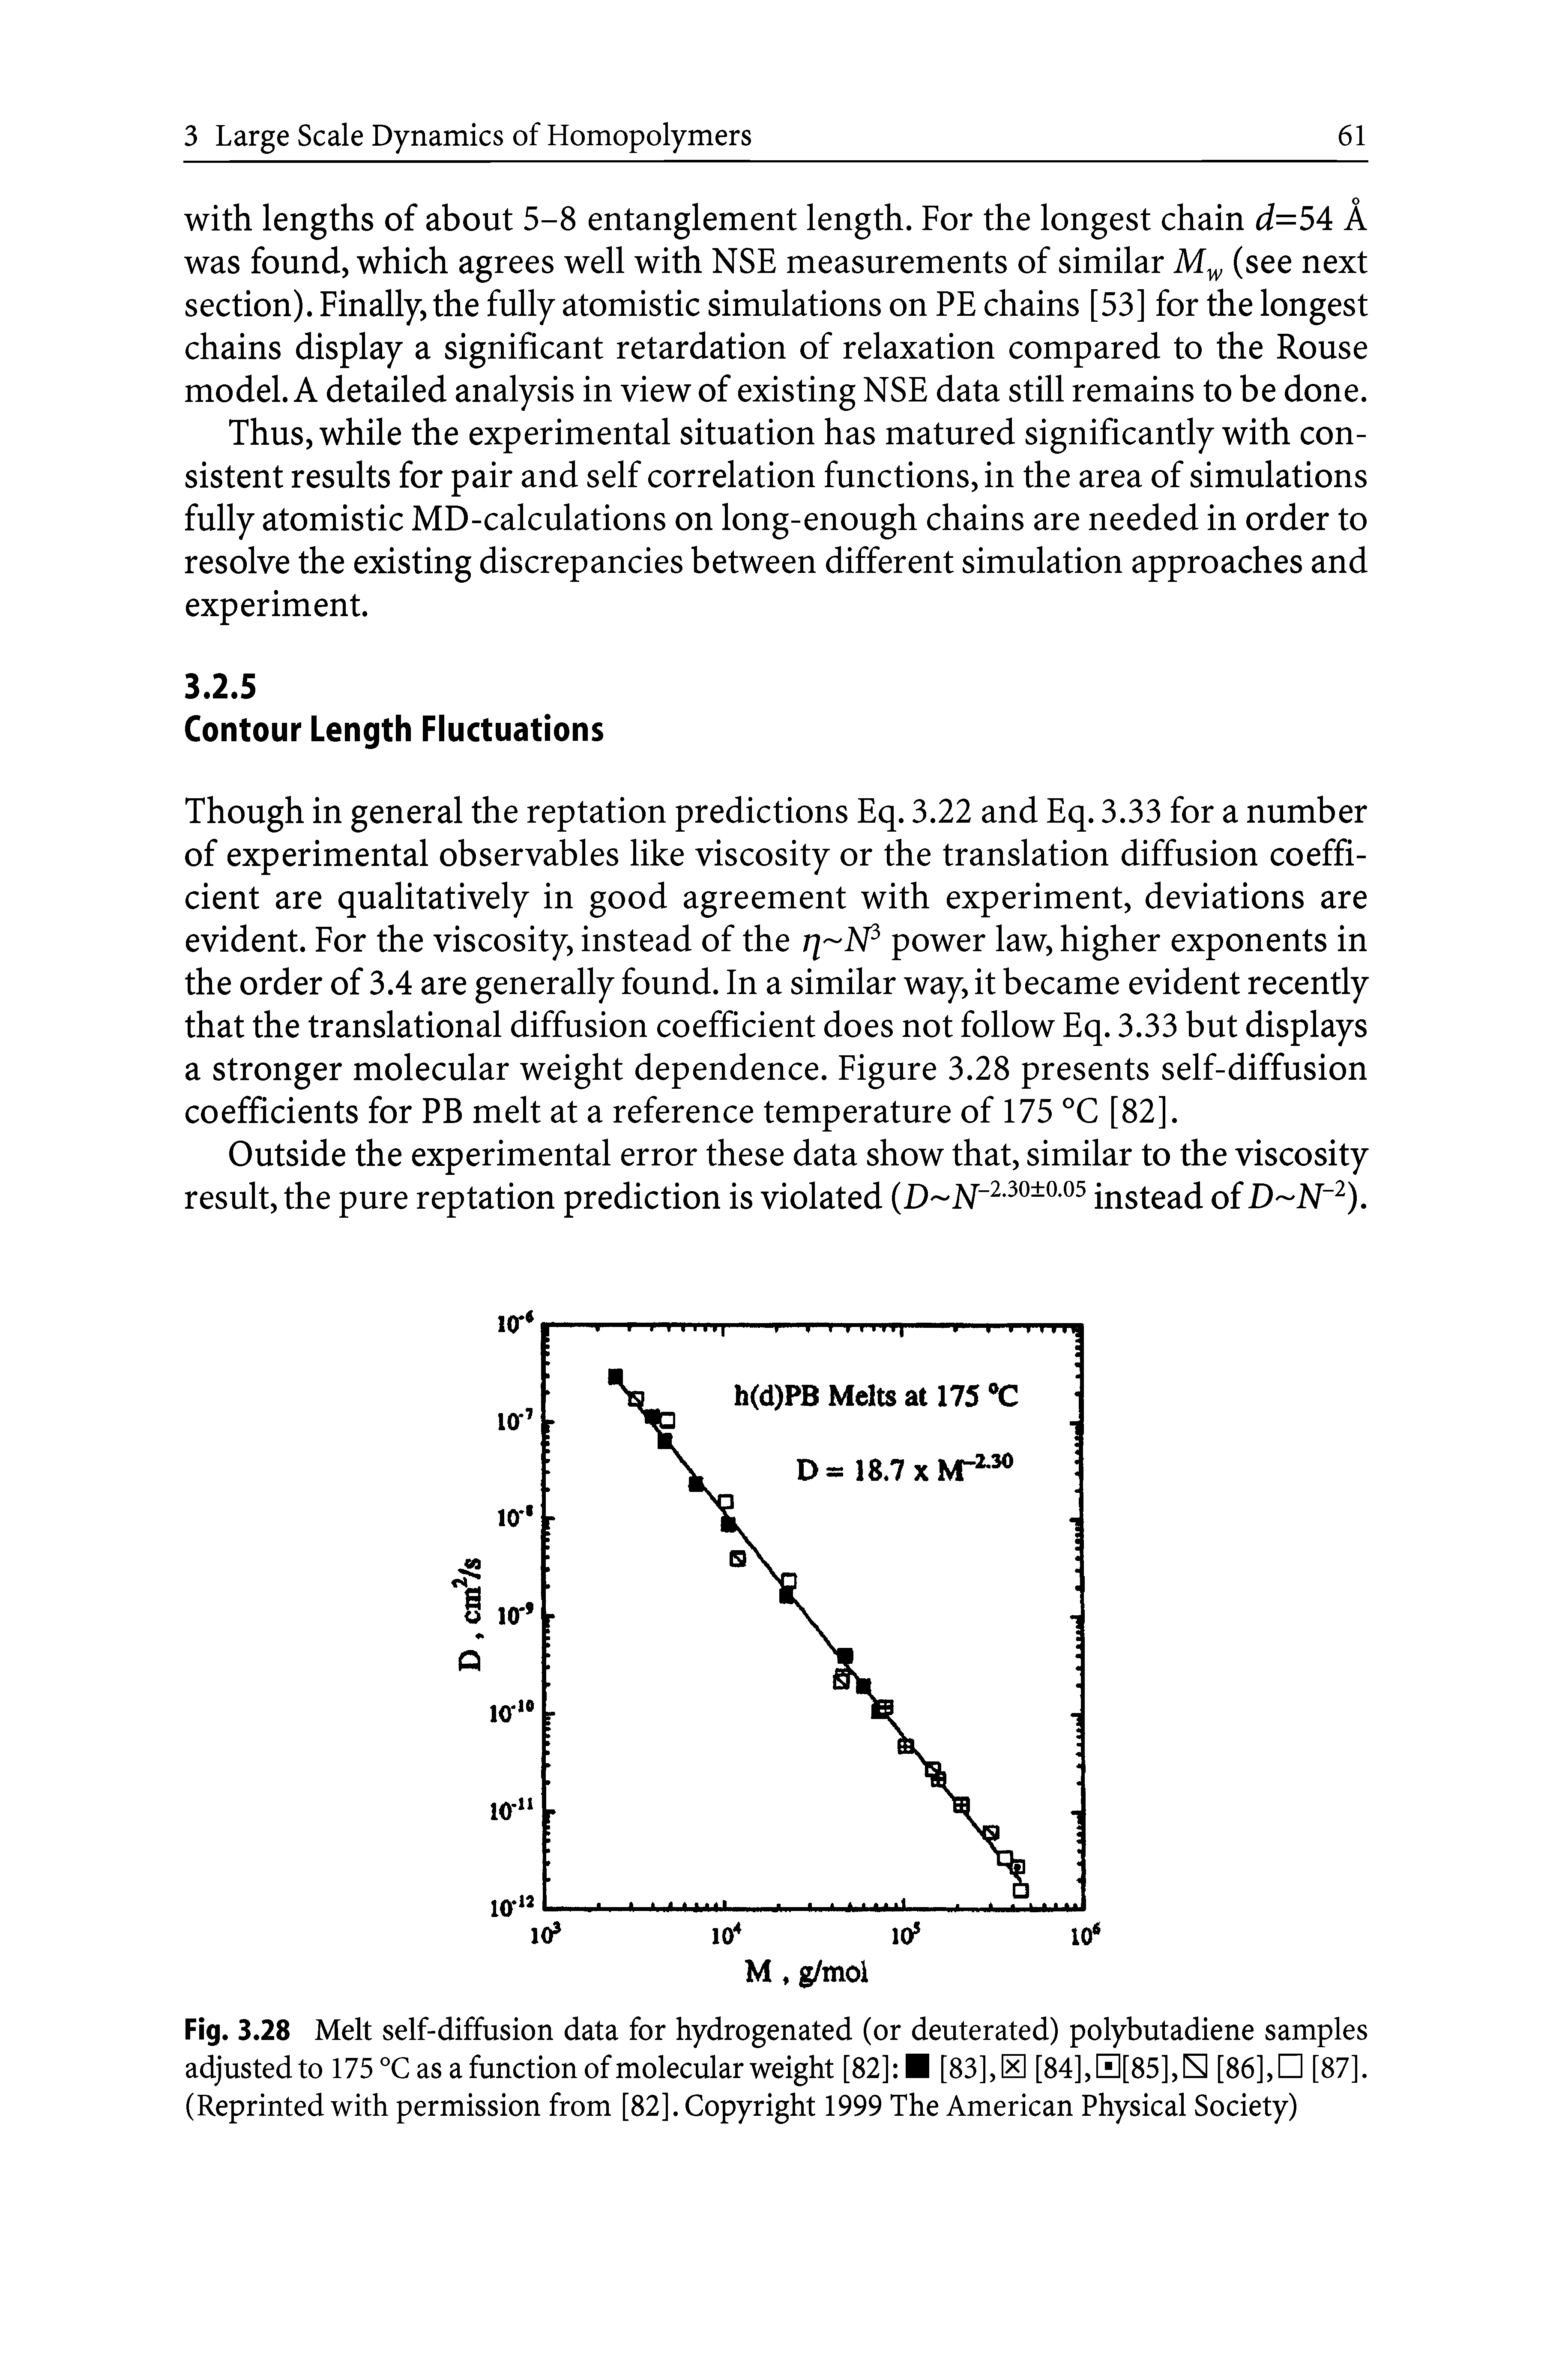 Fig. 3.28 Melt self-diffusion data for hydrogenated (or deuterated) polybutadiene samples adjusted to 175 °C as a function of molecular weight [82] [83], S [84],H[85],S [86], [87]. (Reprinted with permission from [82]. Copyright 1999 The American Physical Society)...